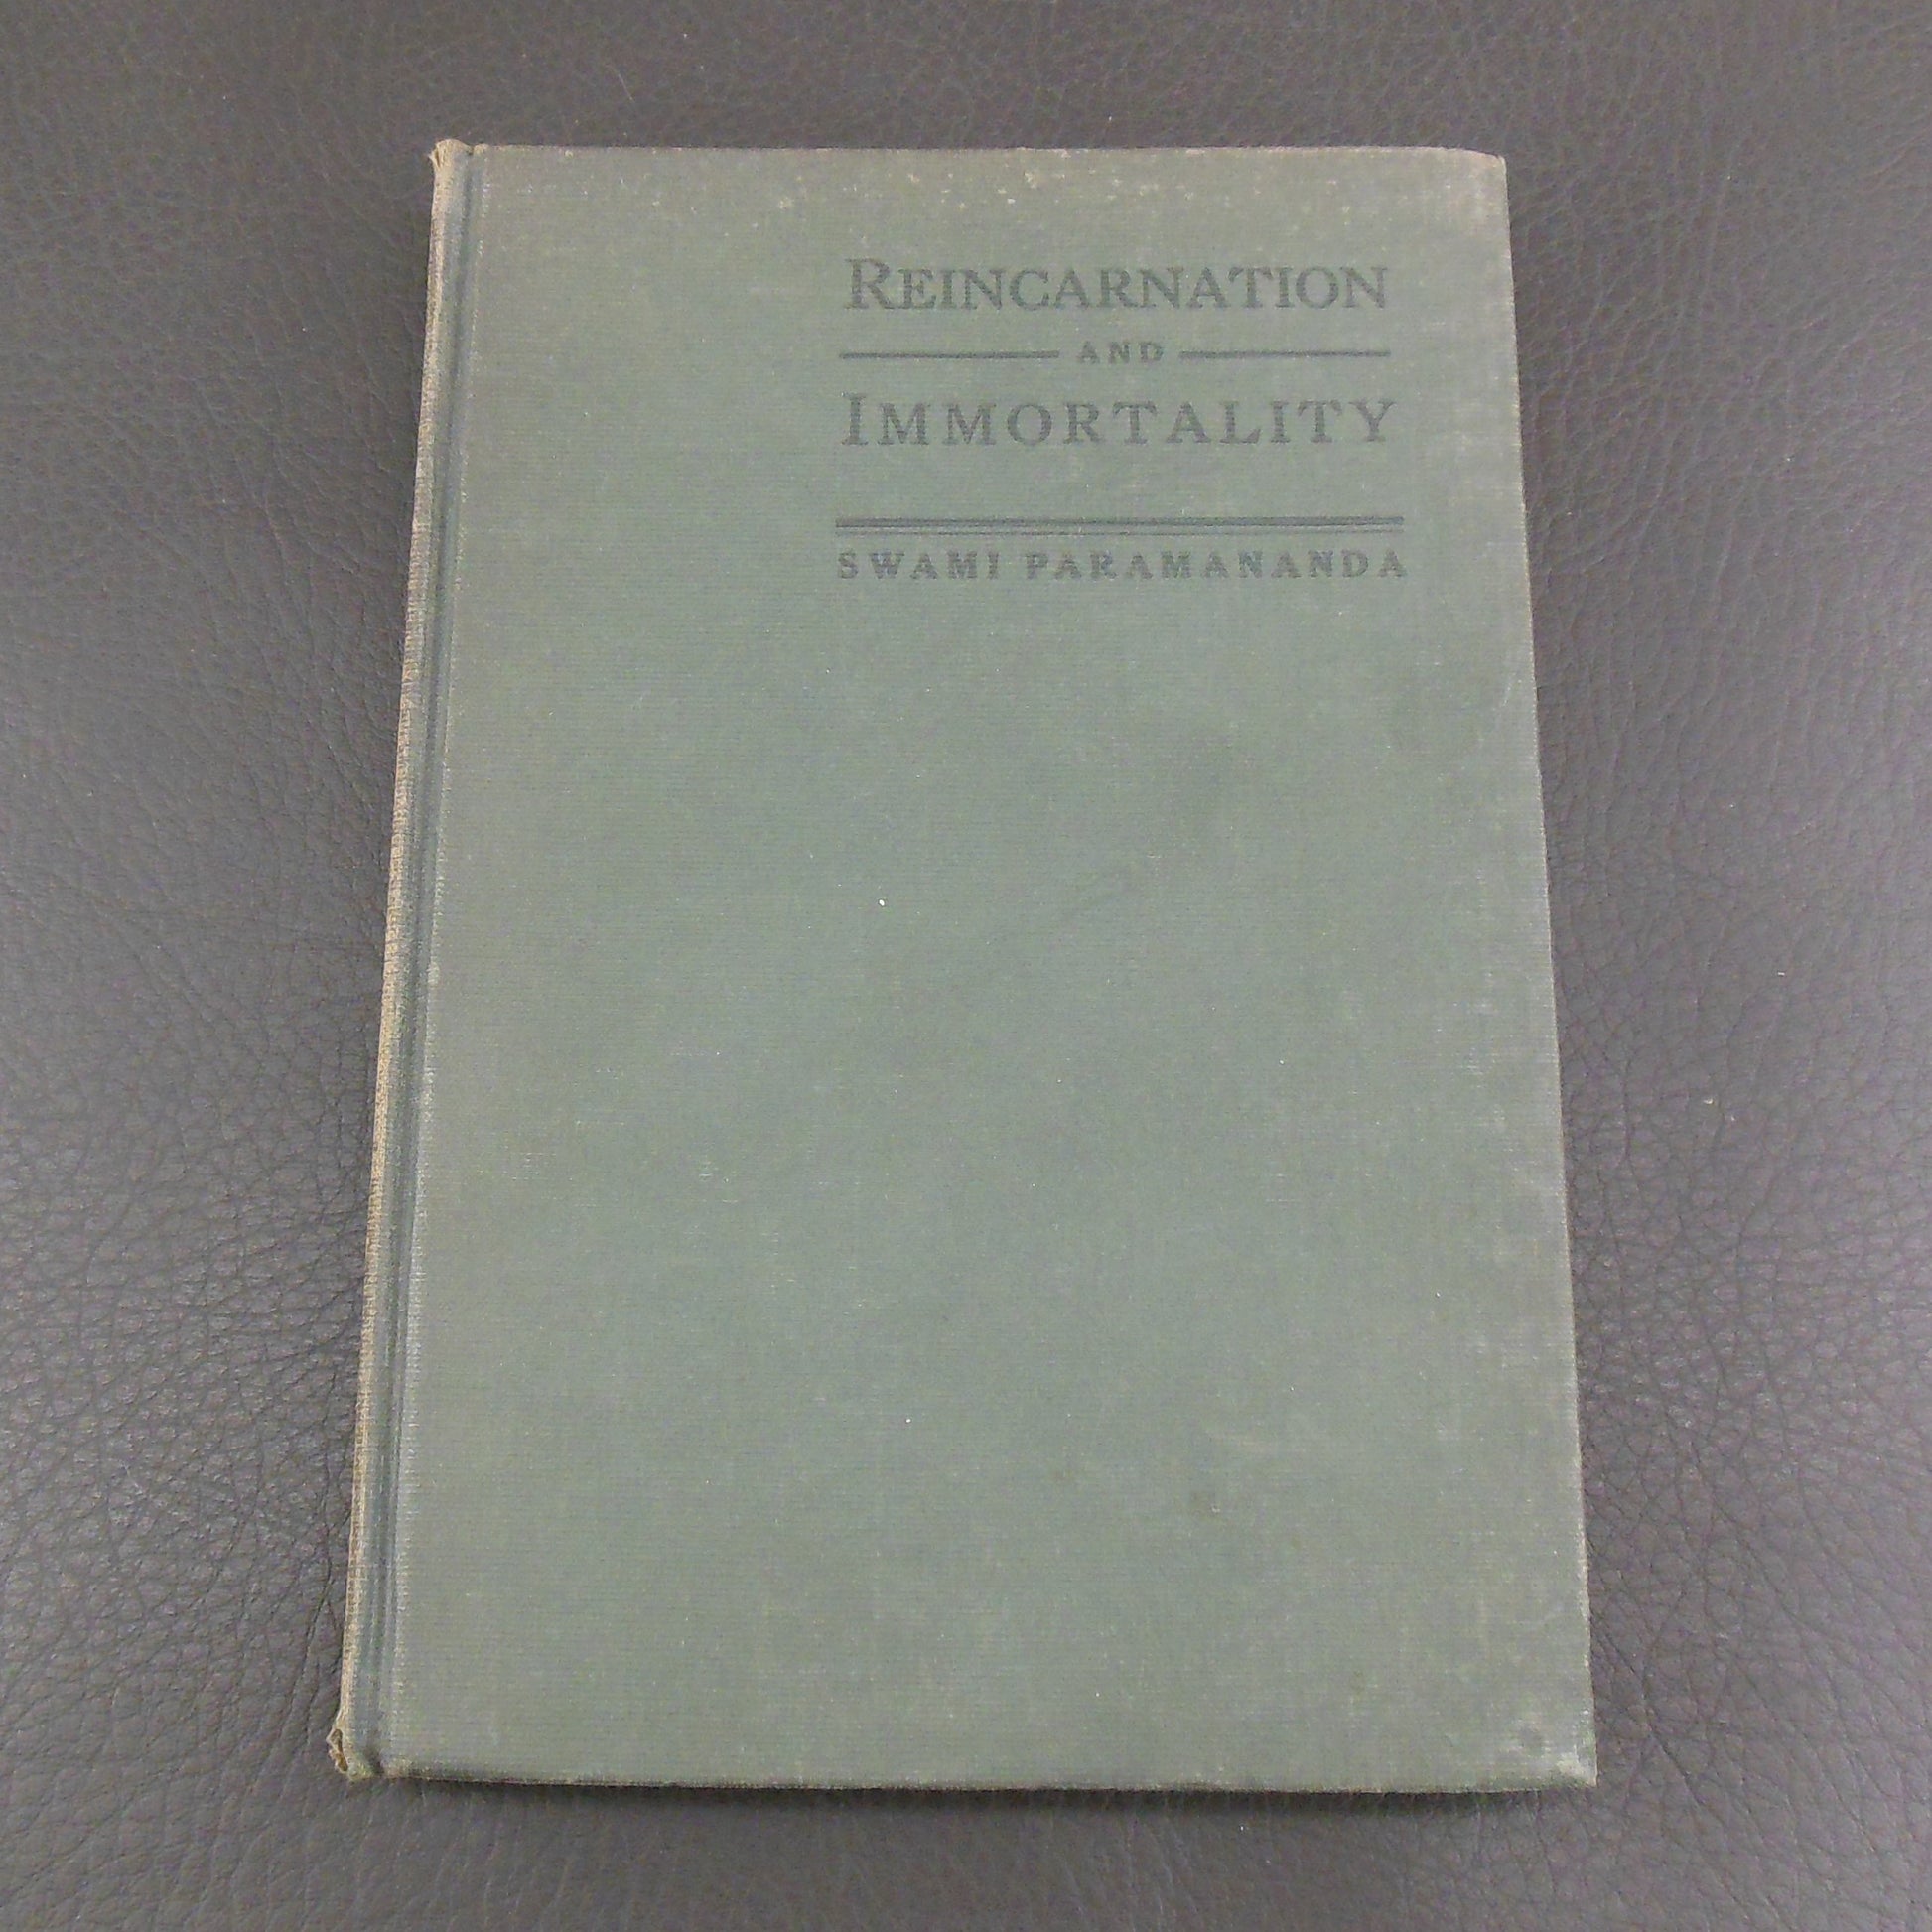 Swami Paramananda Signed Book - Reincarnation and Immortality 1923